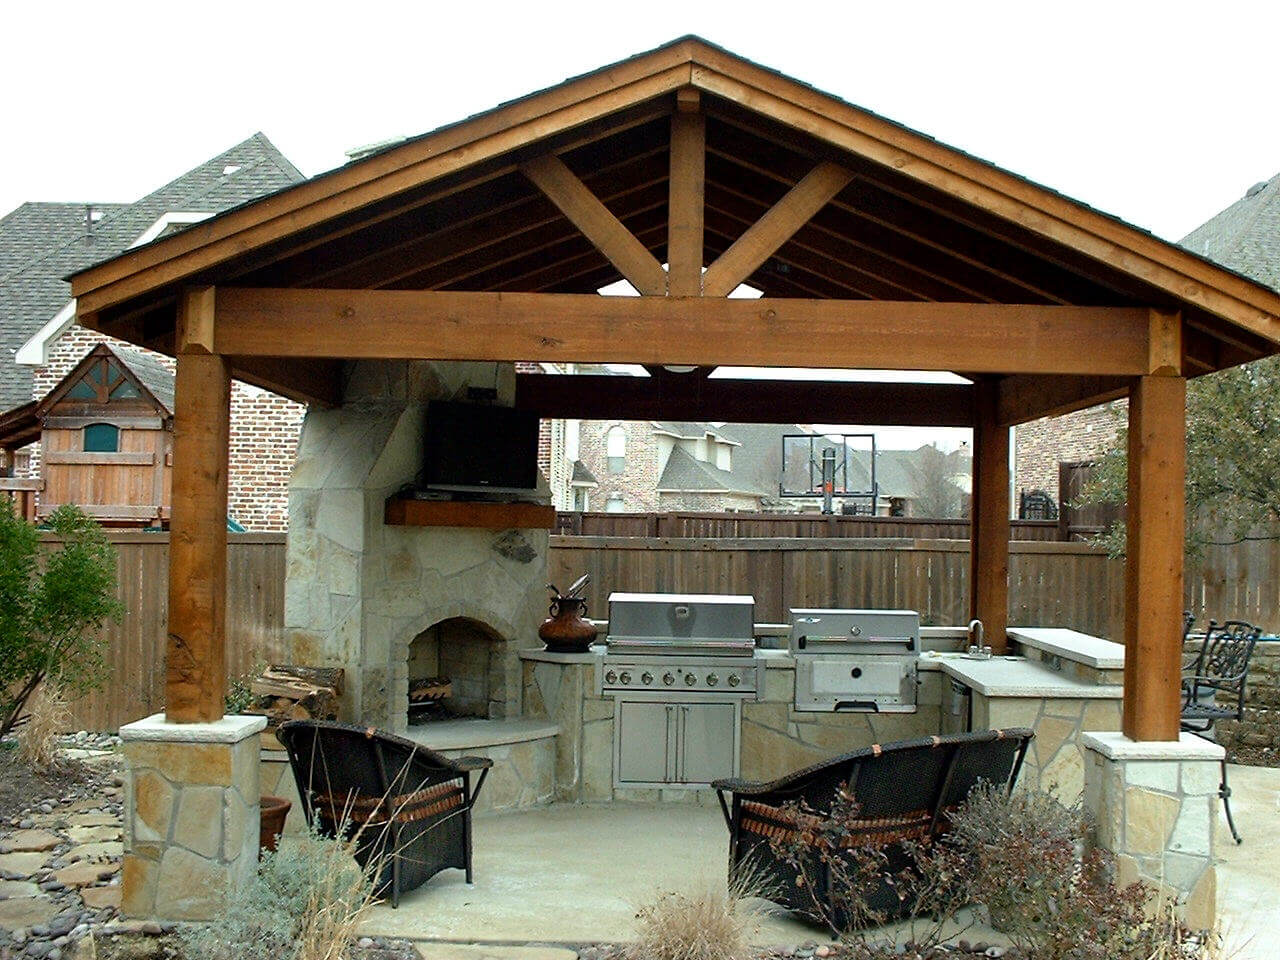 Outdoor Kitchen Ideas and Designs